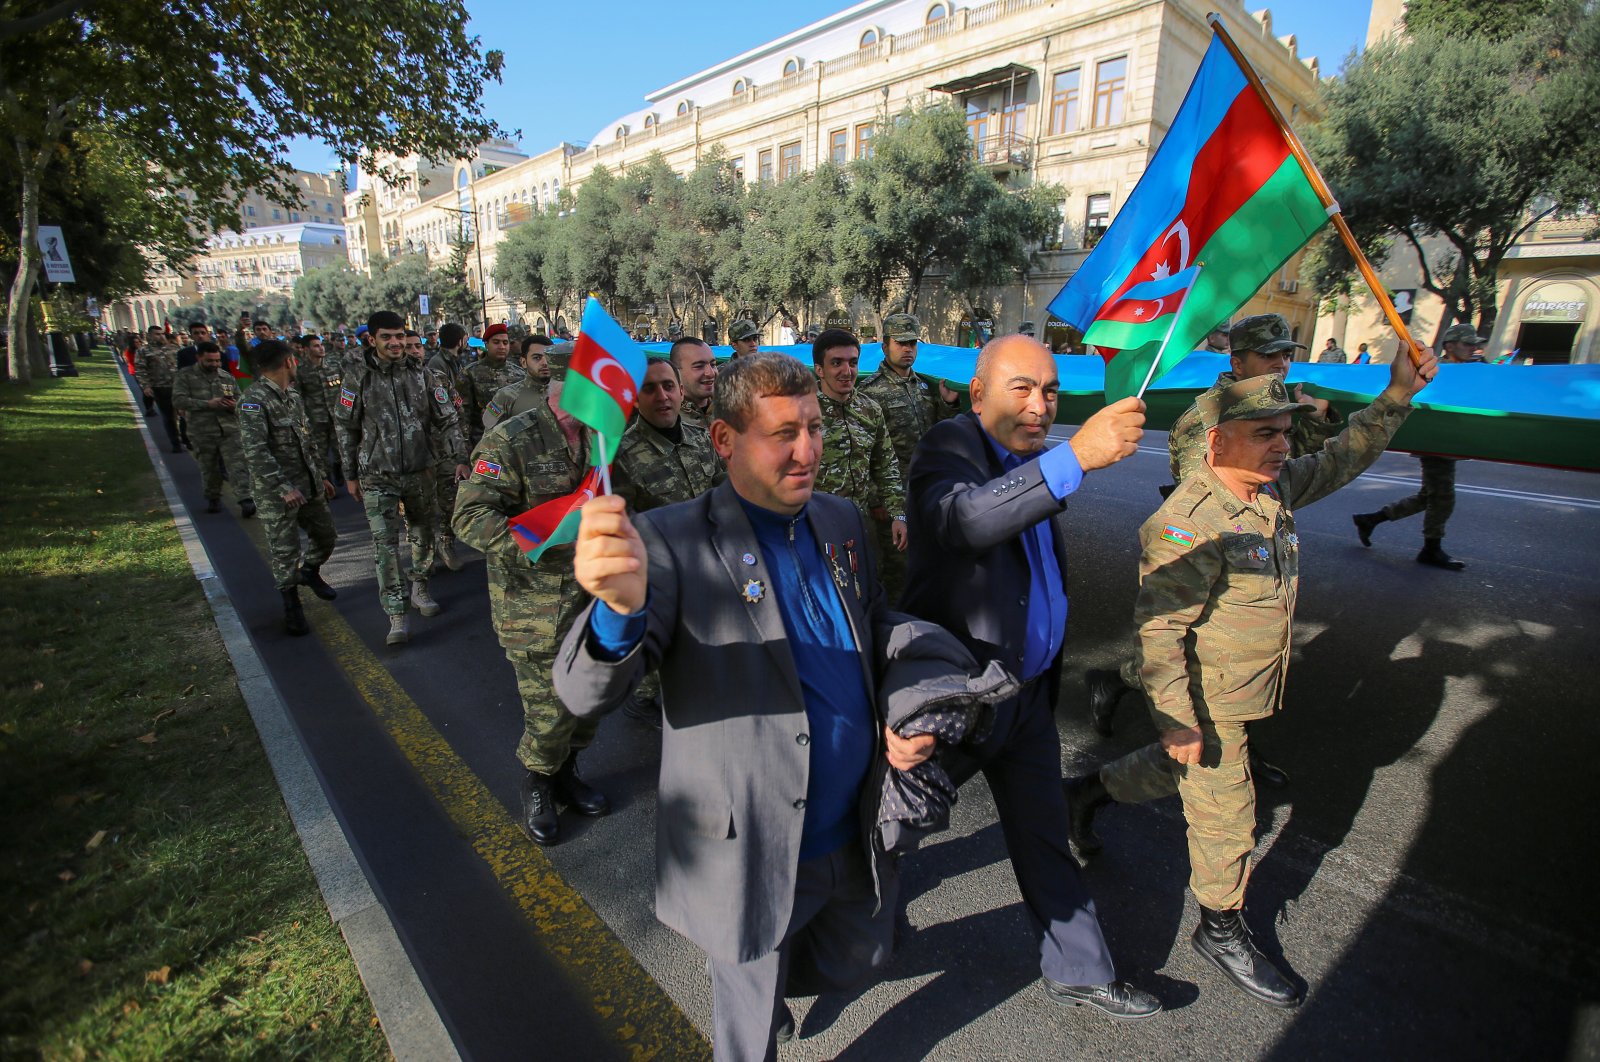 People take part in a procession marking the anniversary of the end of the 2020 military conflict over the Nagorno-Karabakh region, in Baku, Azerbaijan, November 8, 2021. REUTERS/Aziz Karimov